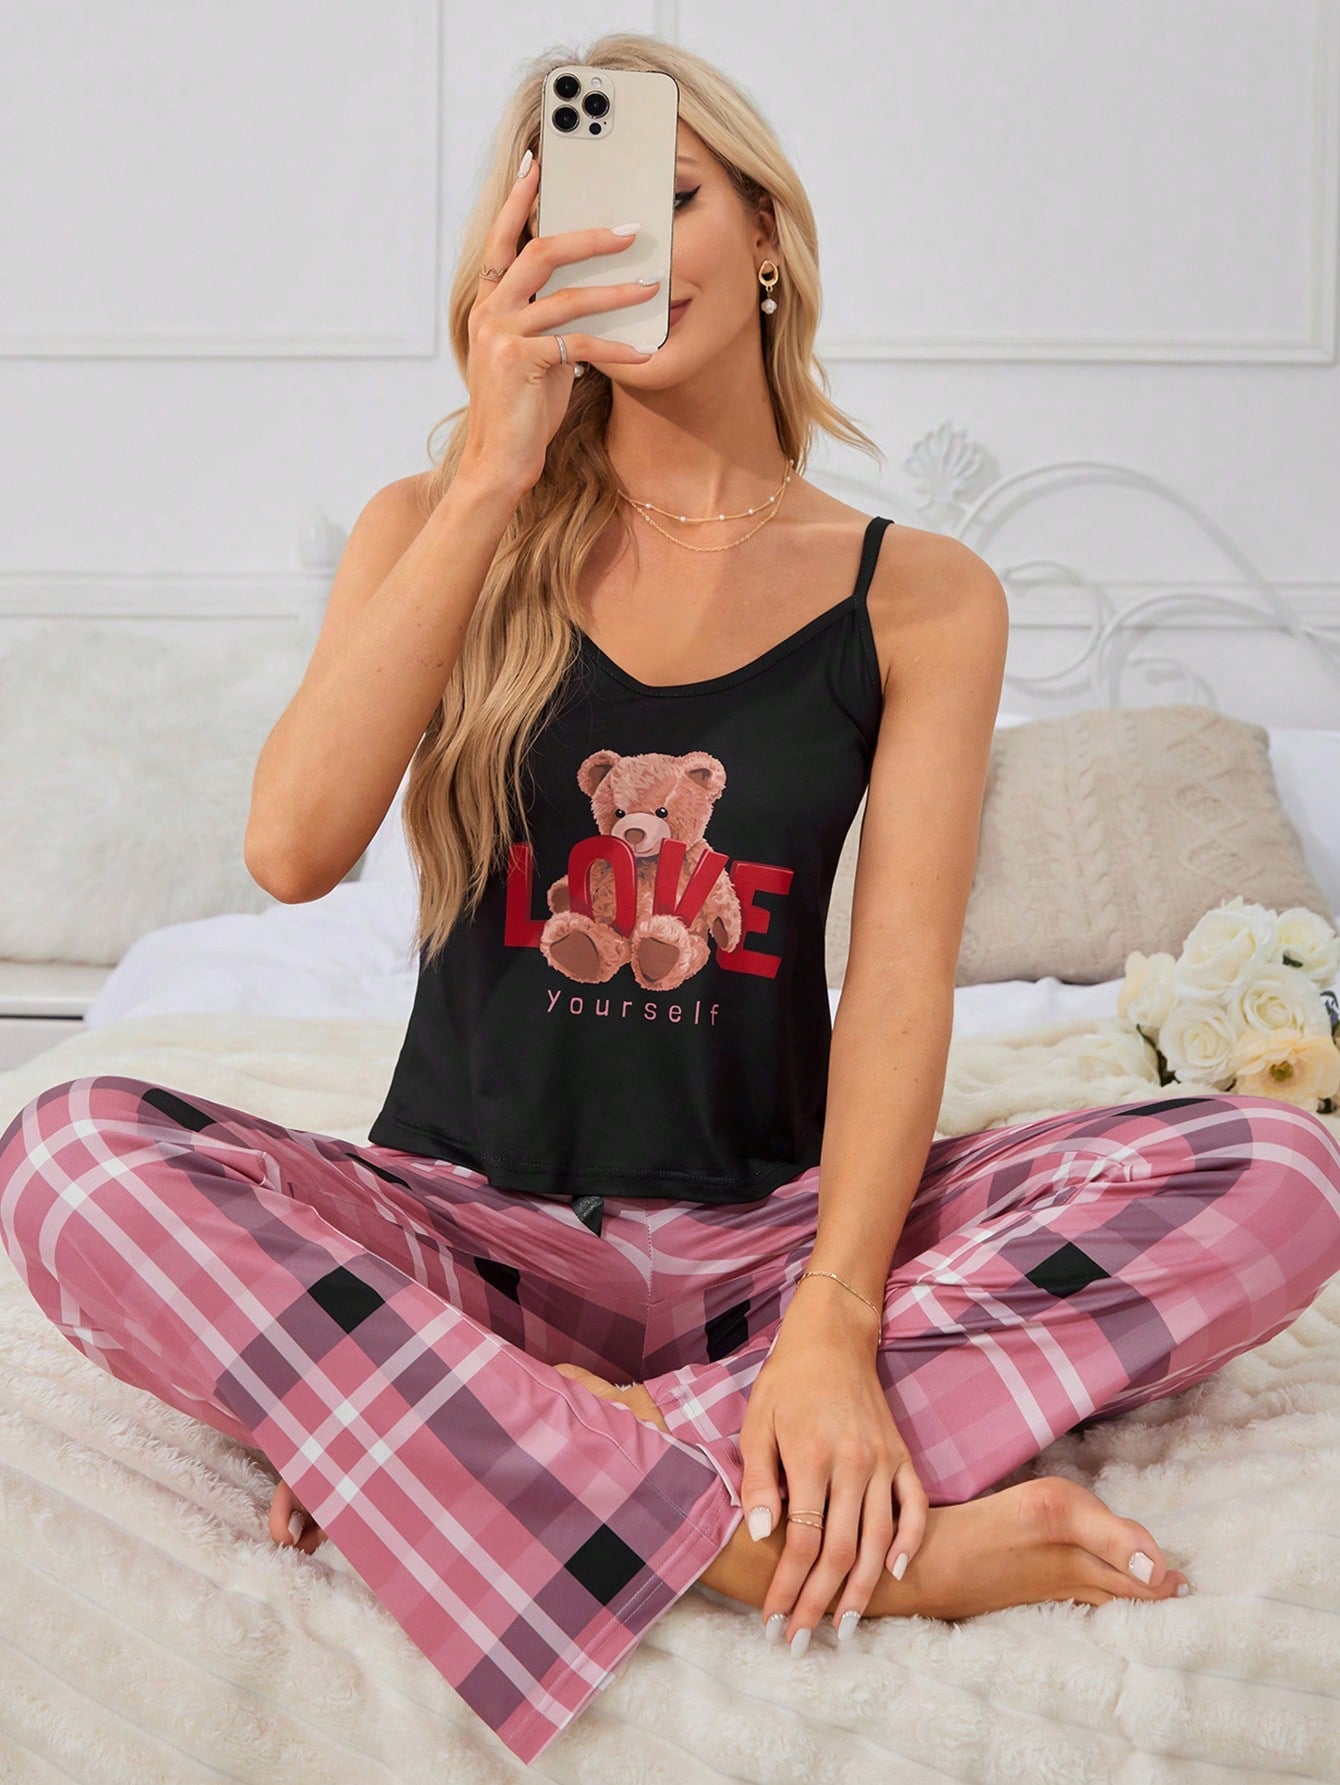 Summer Little Bear Printed Camisole Top And Gingham Printed Shorts Pajamas Set